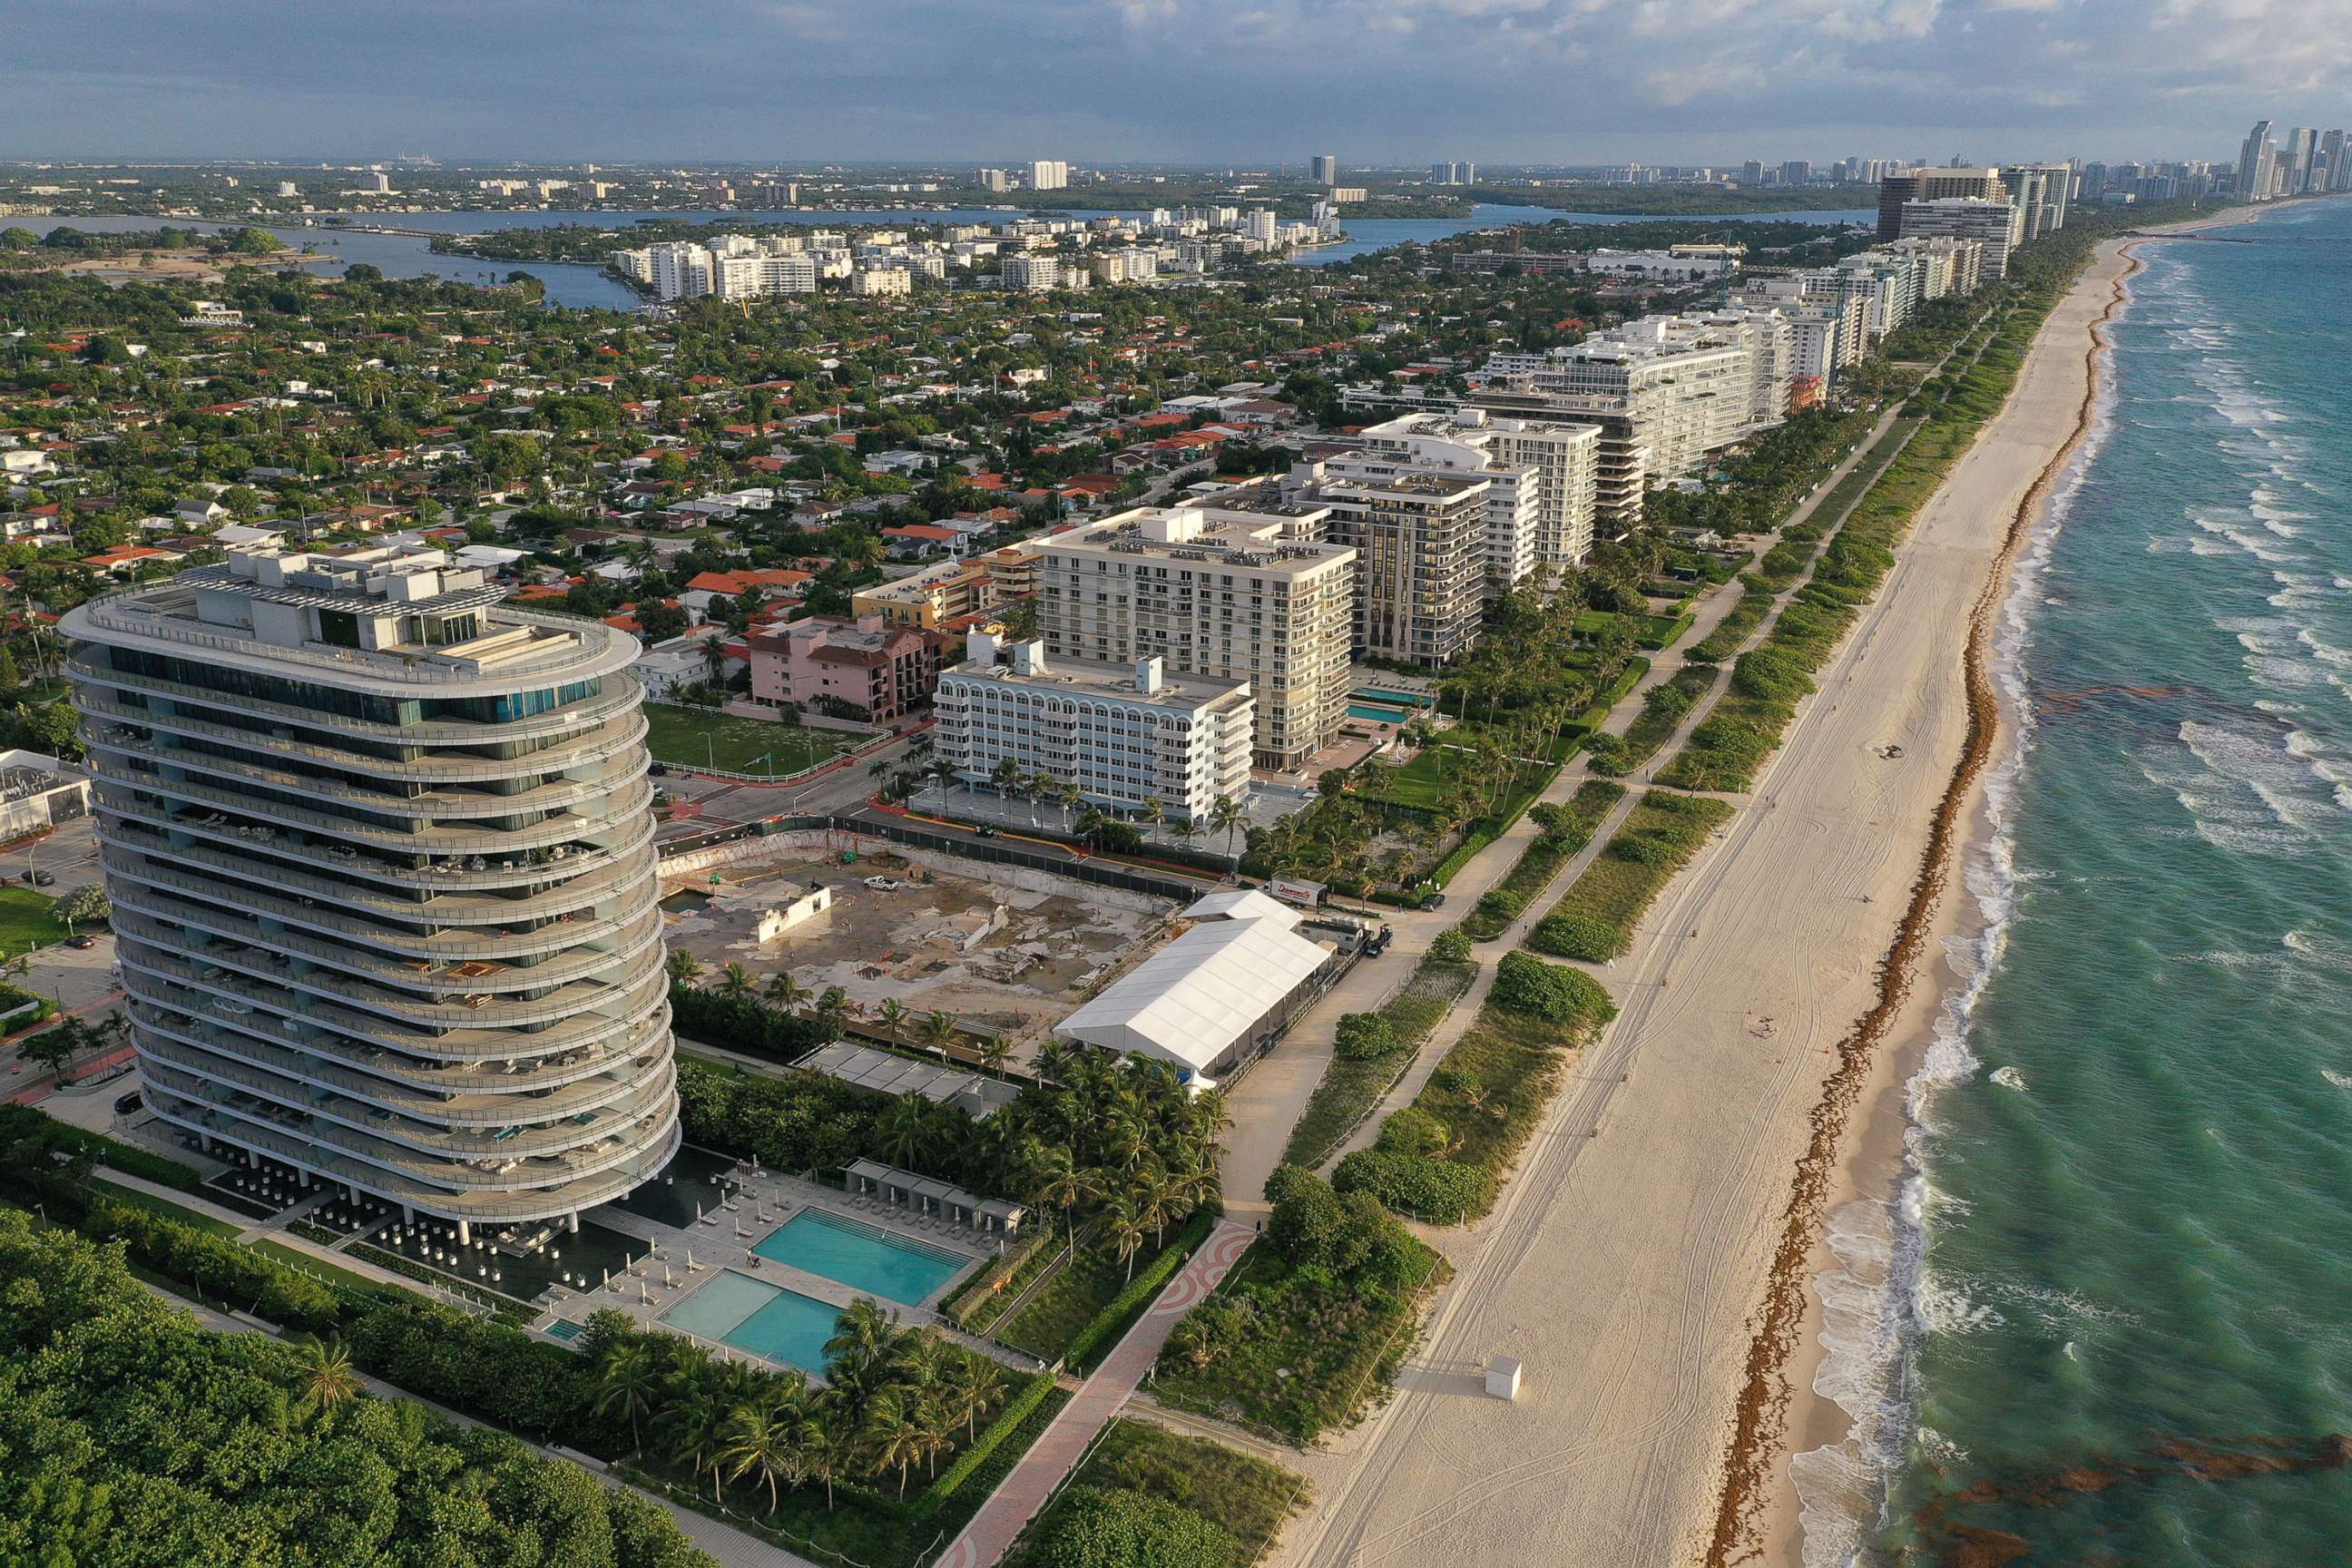 In an aerial view, a cleared lot where the 12-story Champlain Towers South condo building once stood is seen on June 22, 2022 in Surfside, Florida.